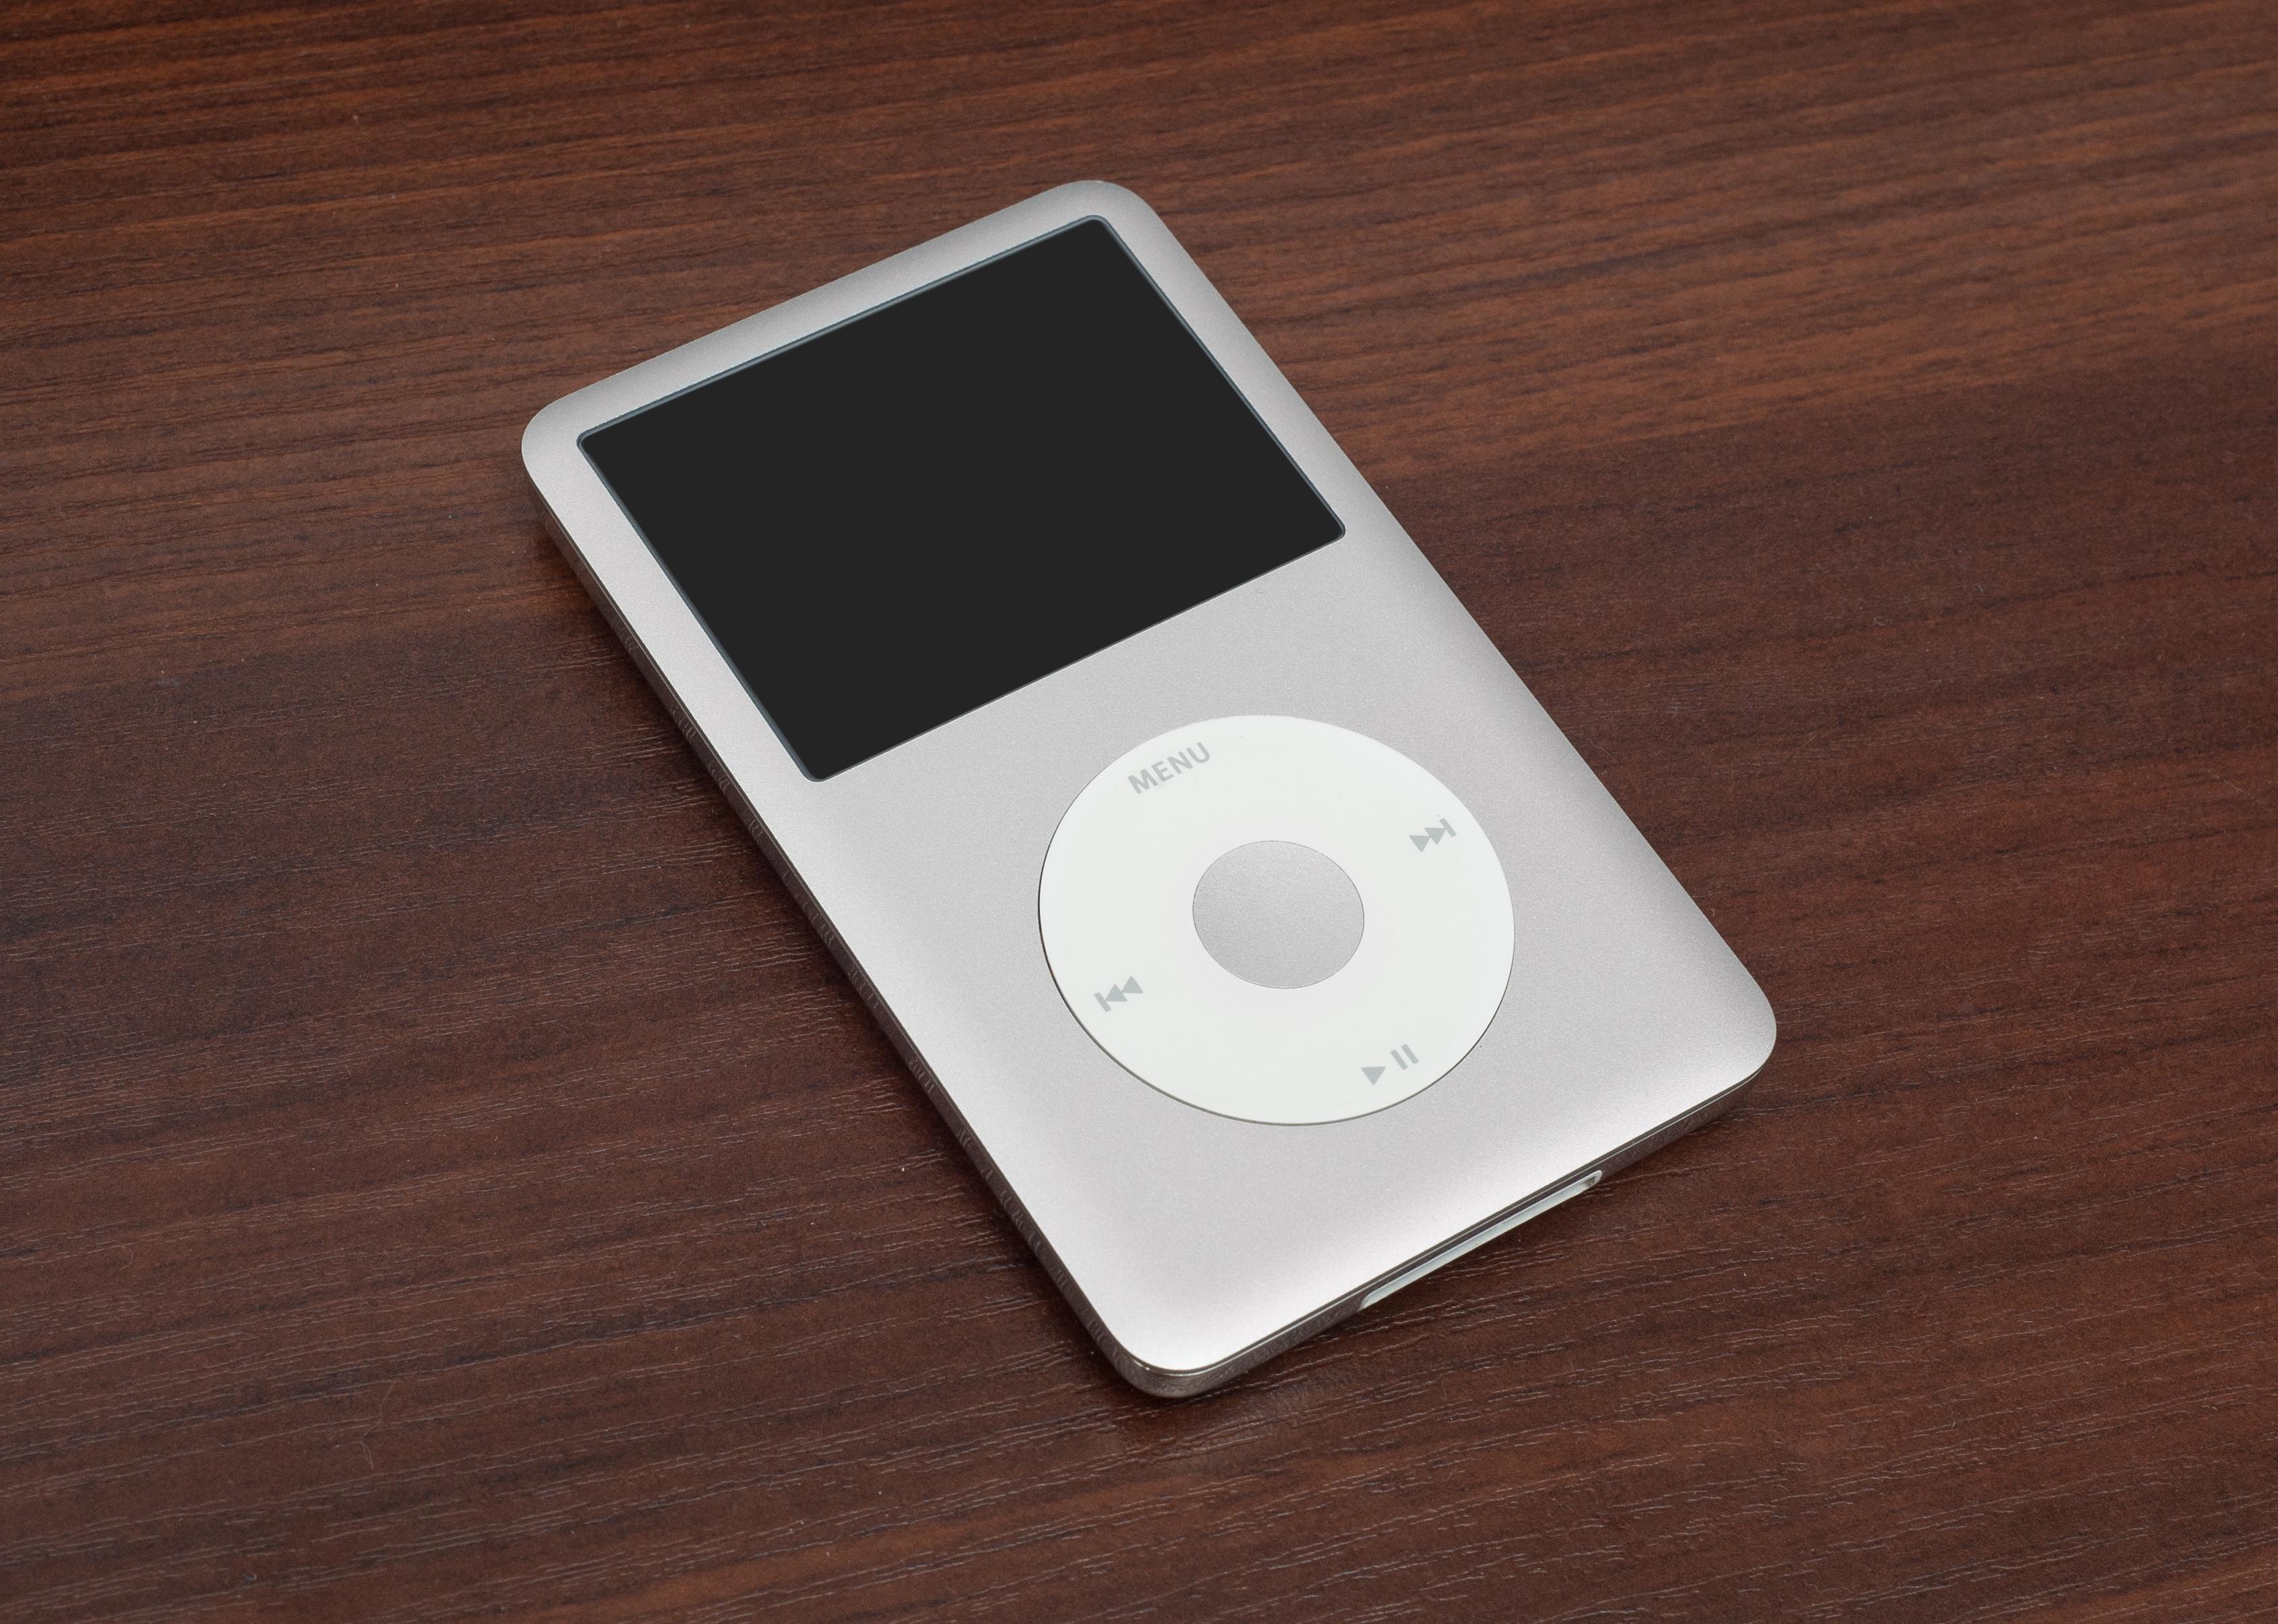 iPod Classic on a wooden table.